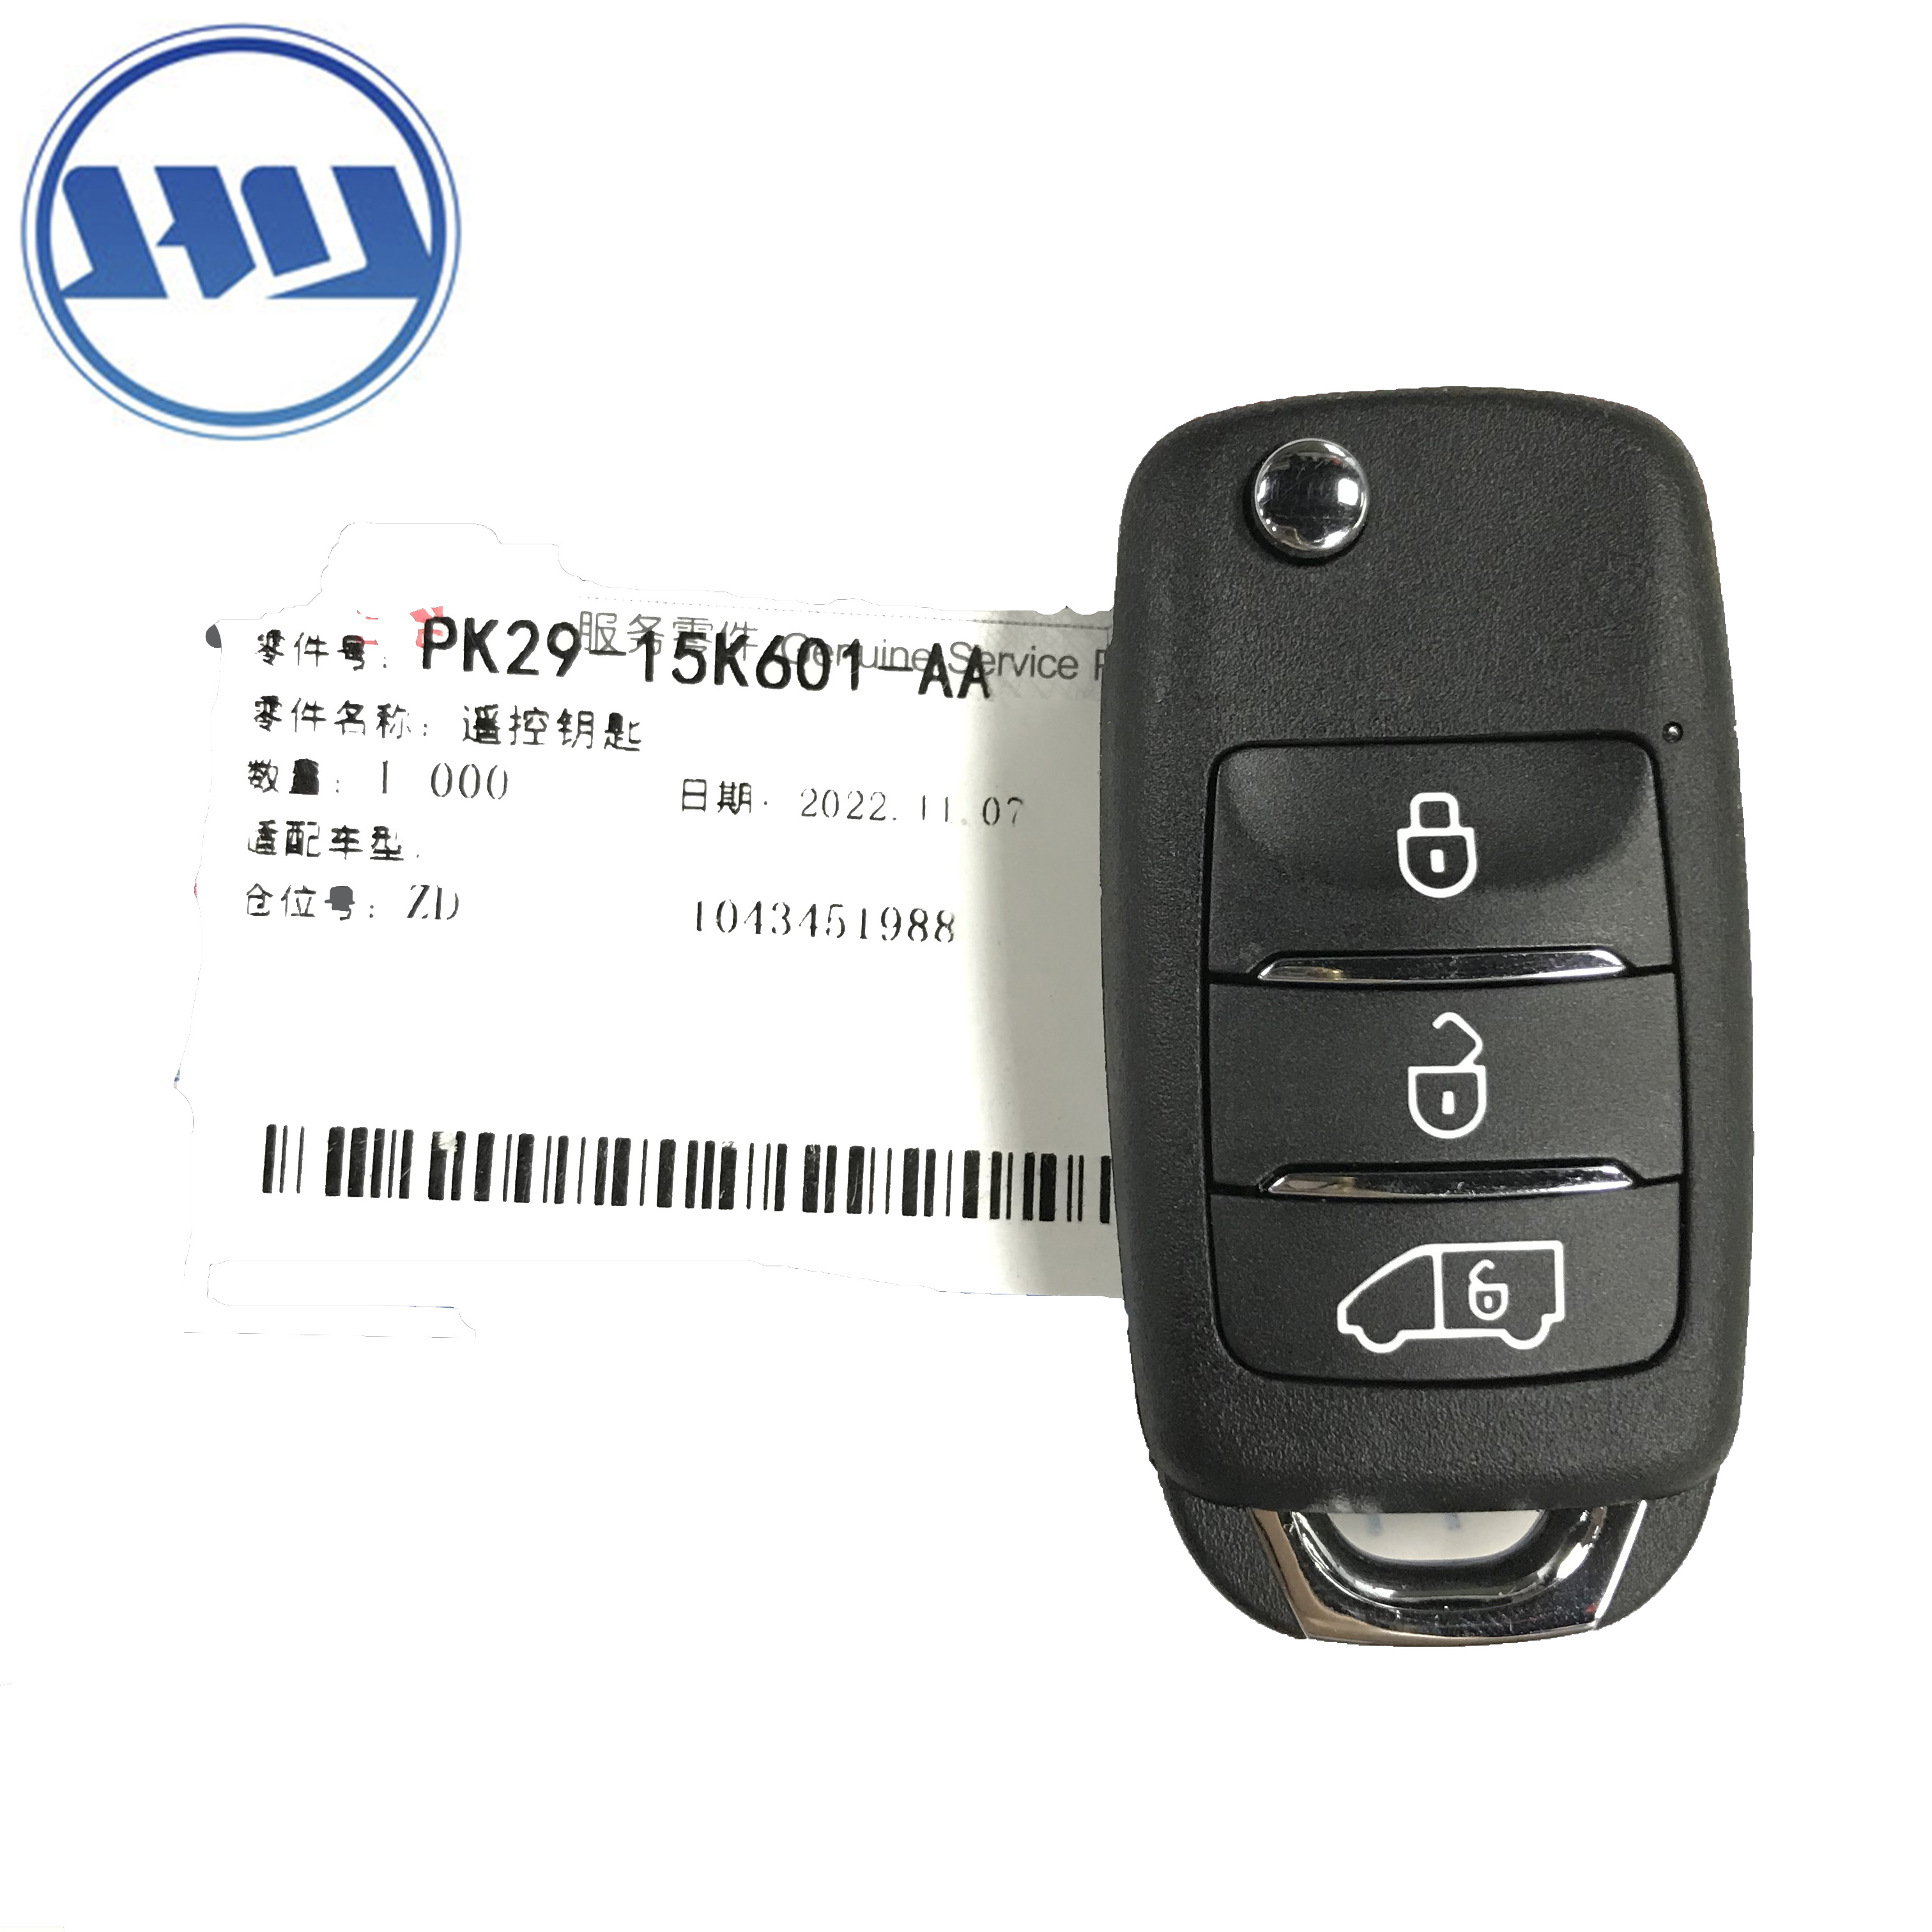 Genuine 3Button Ford Car Remote Key ASK433.92 Frequency 46chip PN:PK29 15K601 AA